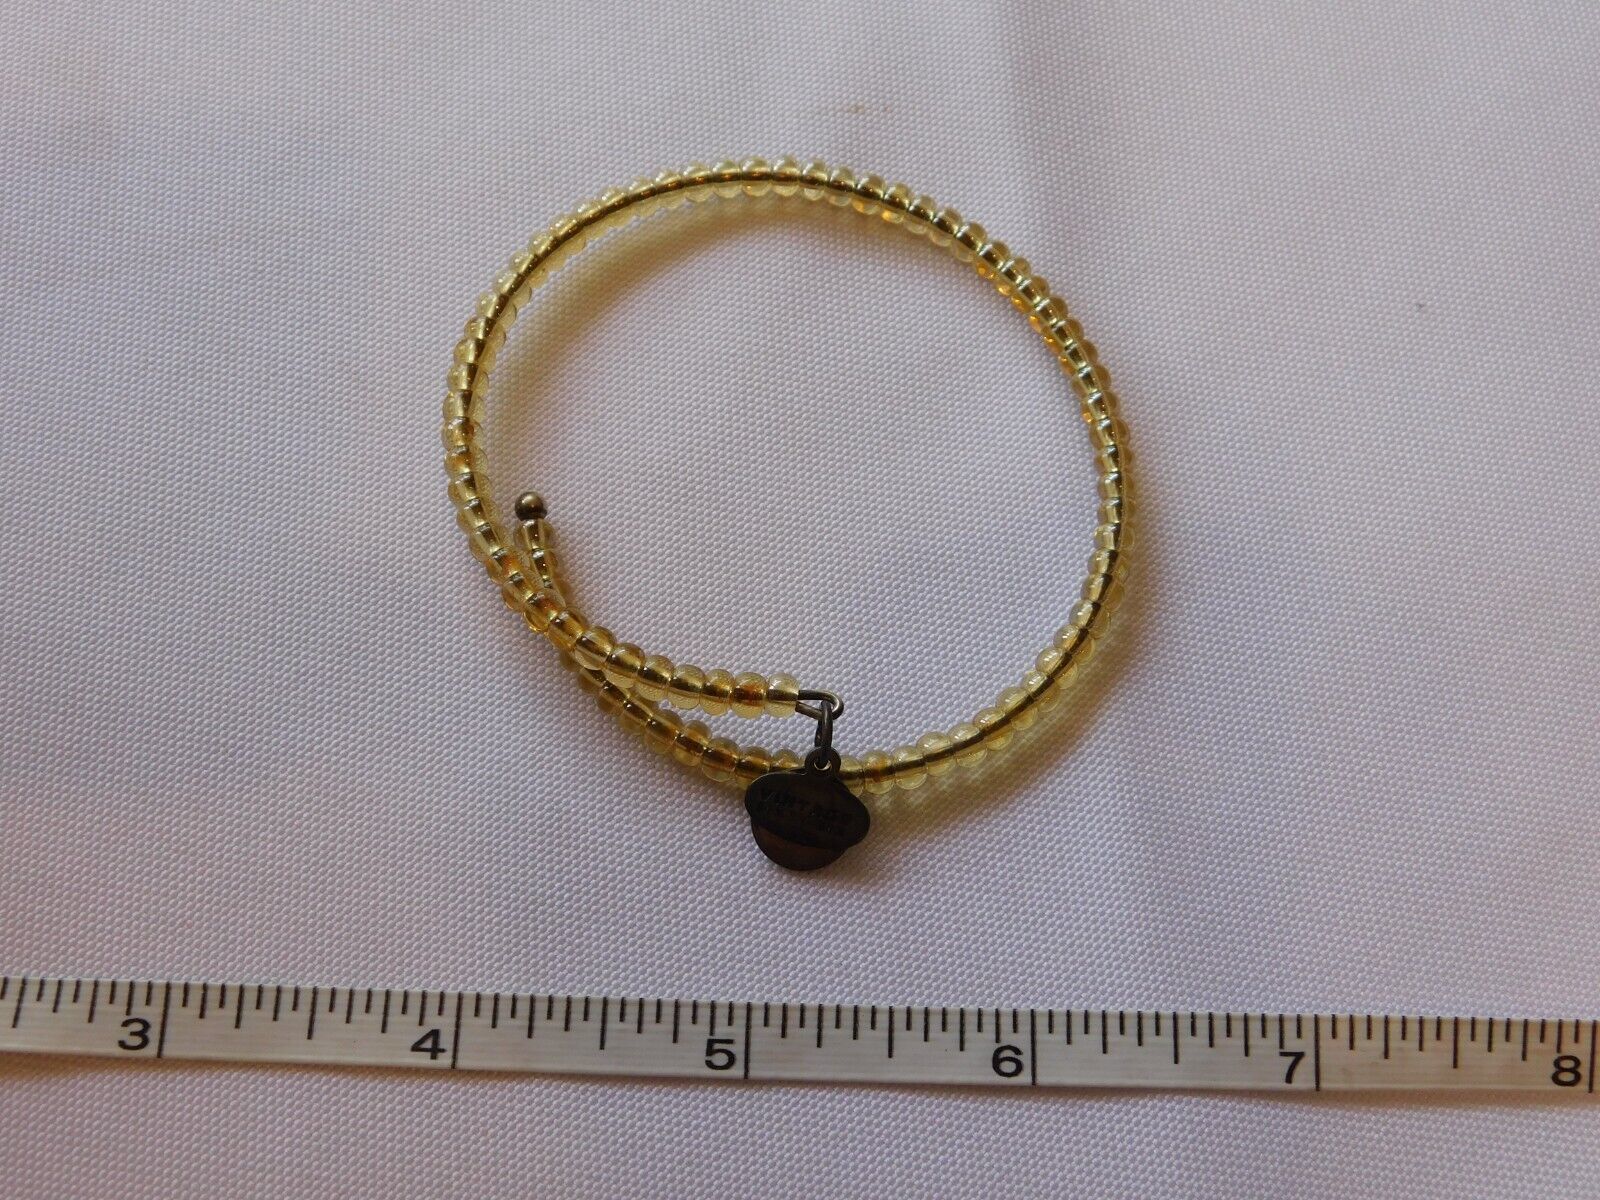 Primary image for Alex and Ani Bangle Adjustable Bracelet Yellowish Clear Bead Beaded Pre-owned